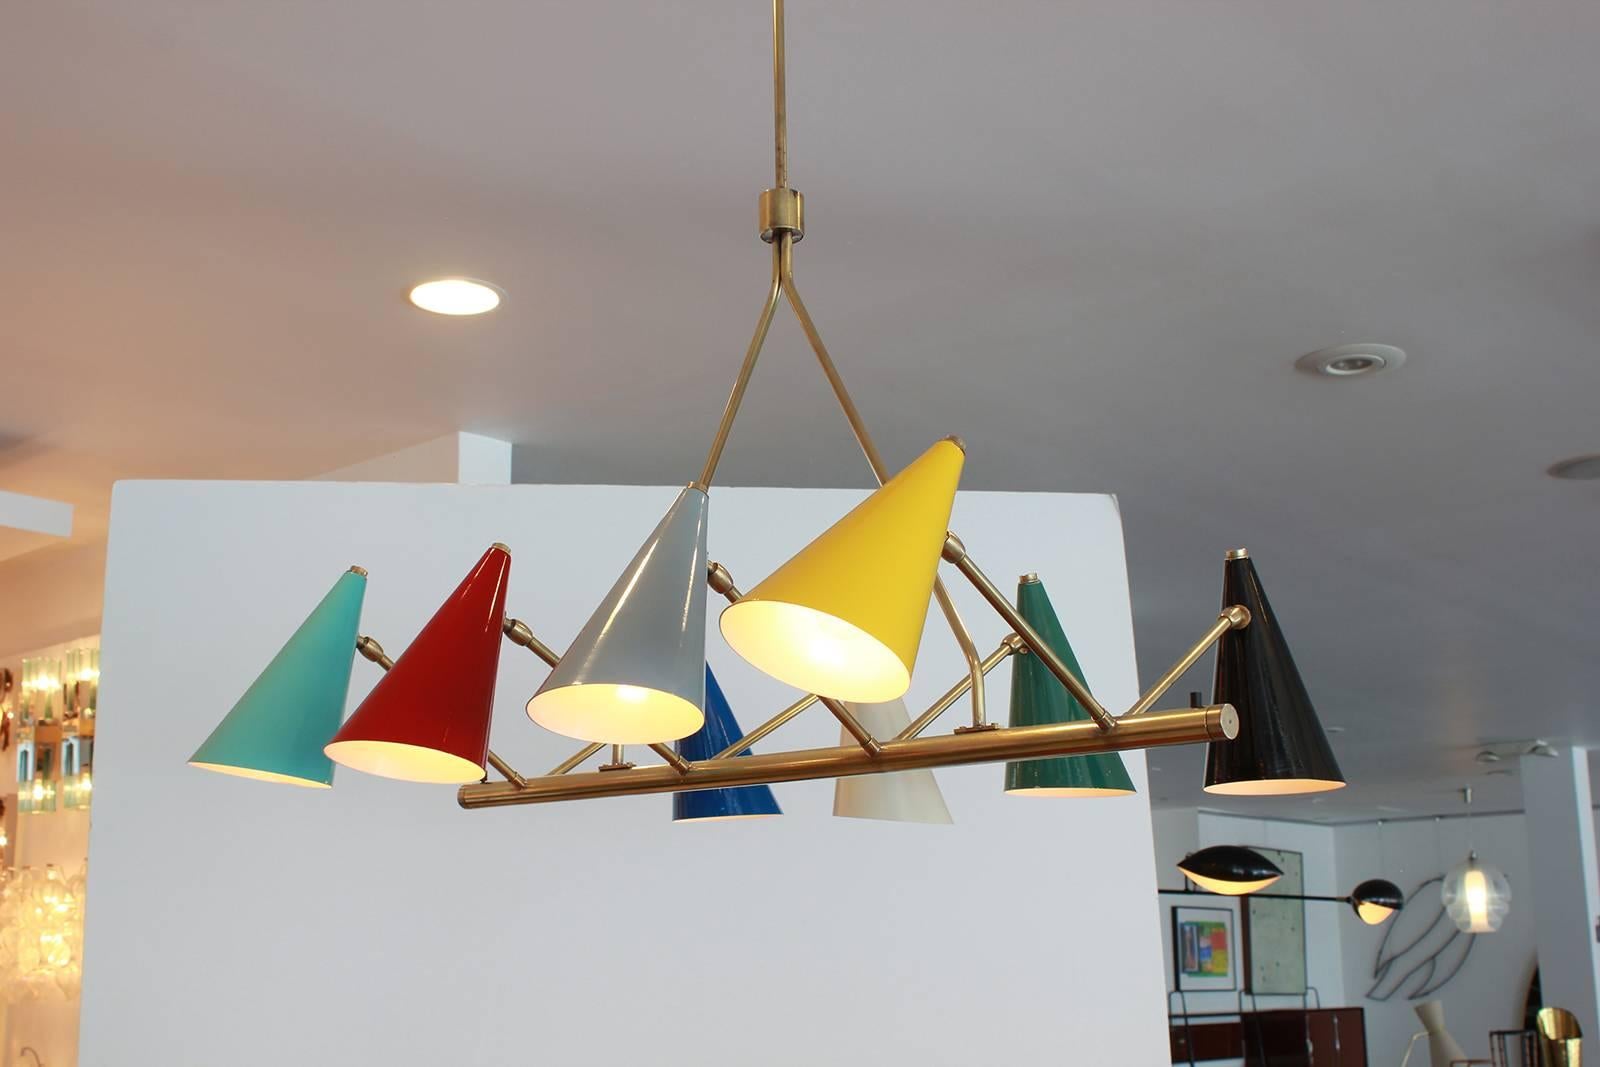 Fantastic articulating Italian chandelier with nine different colored cone shades in original colors. Brass arms and hardware.
Would be great above kitchen island or pool table! 

Measures: Overall drop: 42" 
Base to joint in drop: 20".